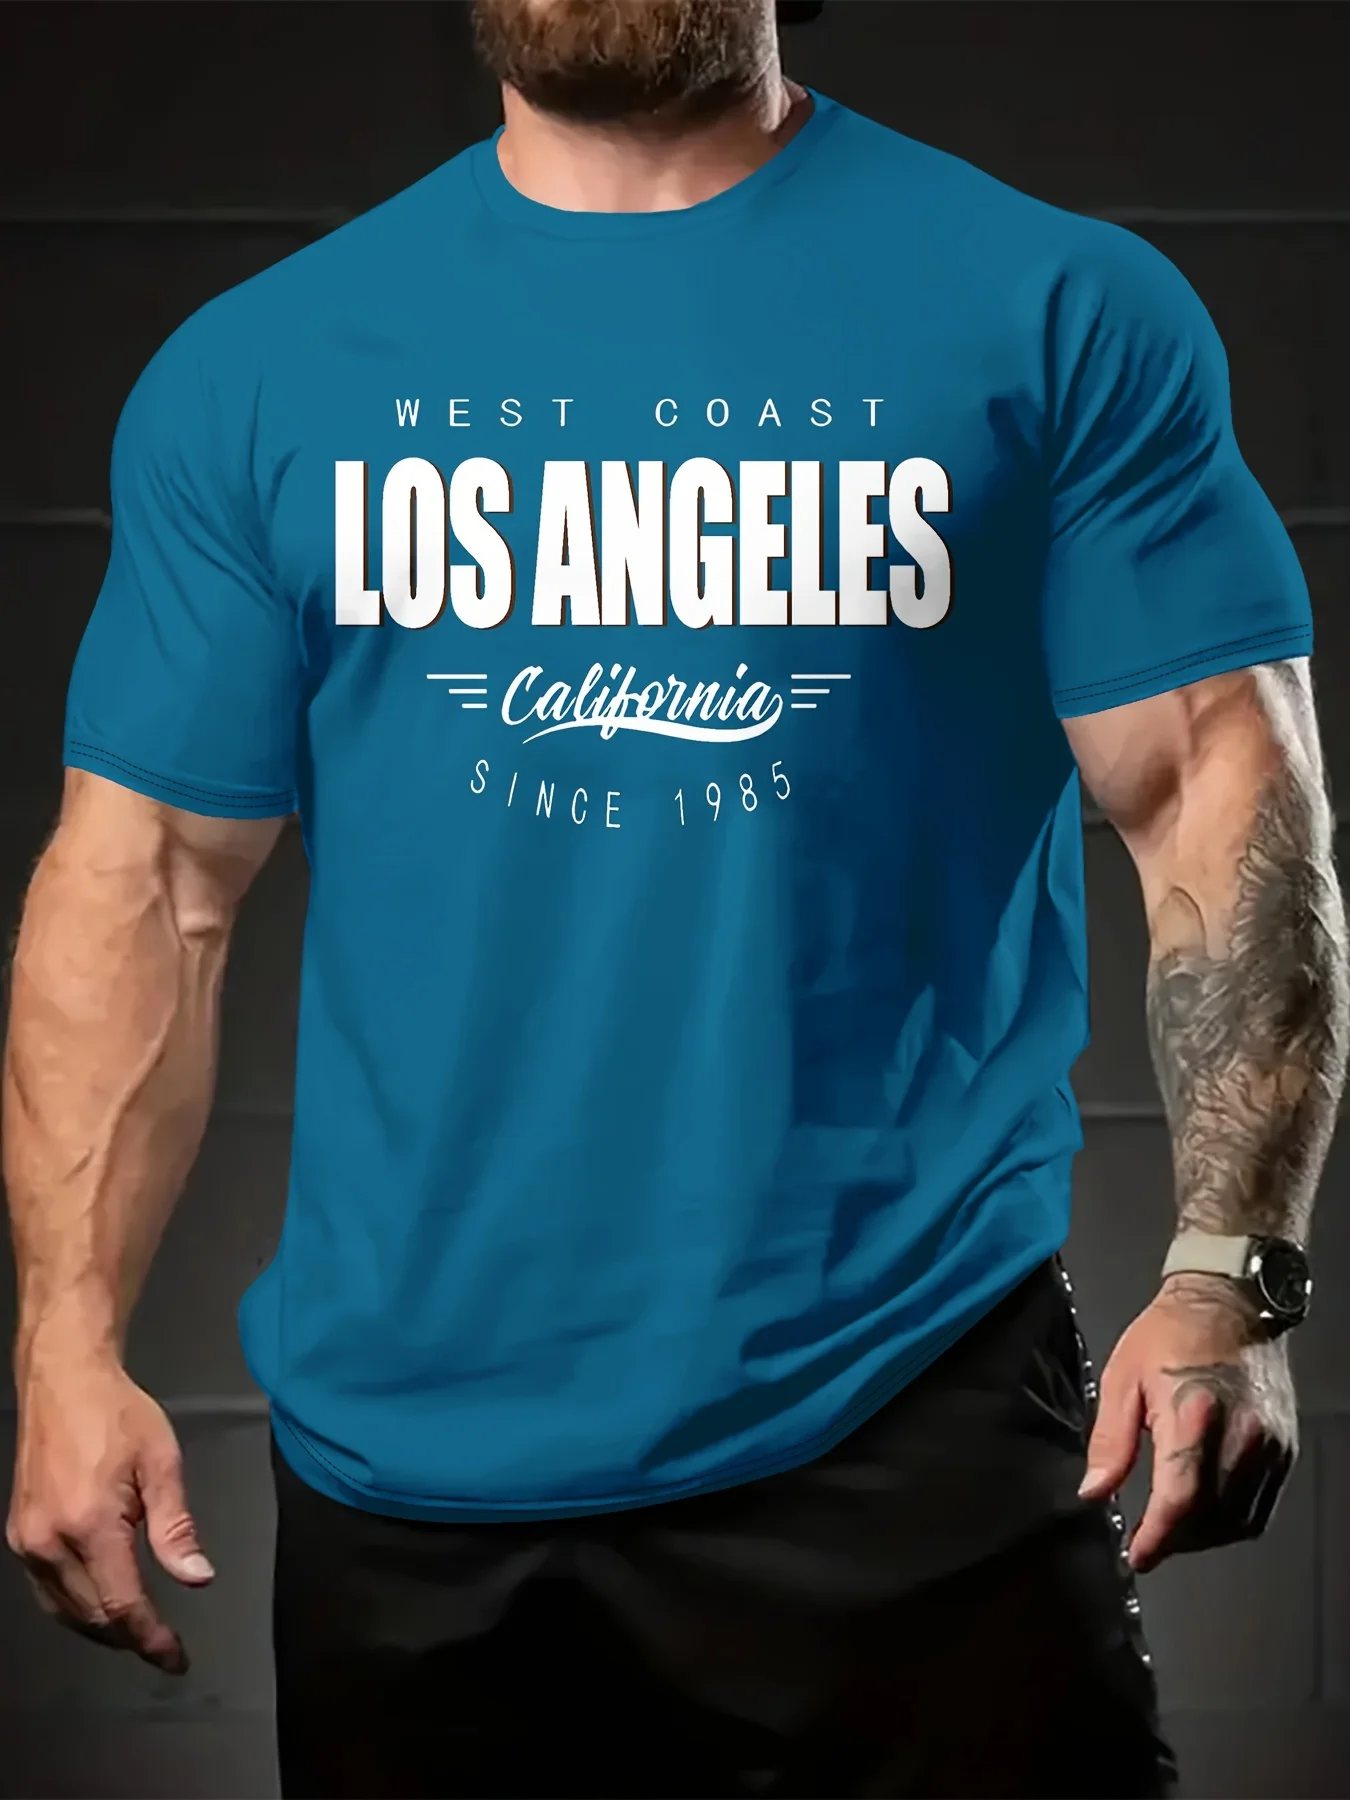 

LOS ANGELES MONOGRAPH CREW NECK SHORT SLEEVE T-SHIRT - Soft, breathable, perfect for summer vacations and everyday wear.